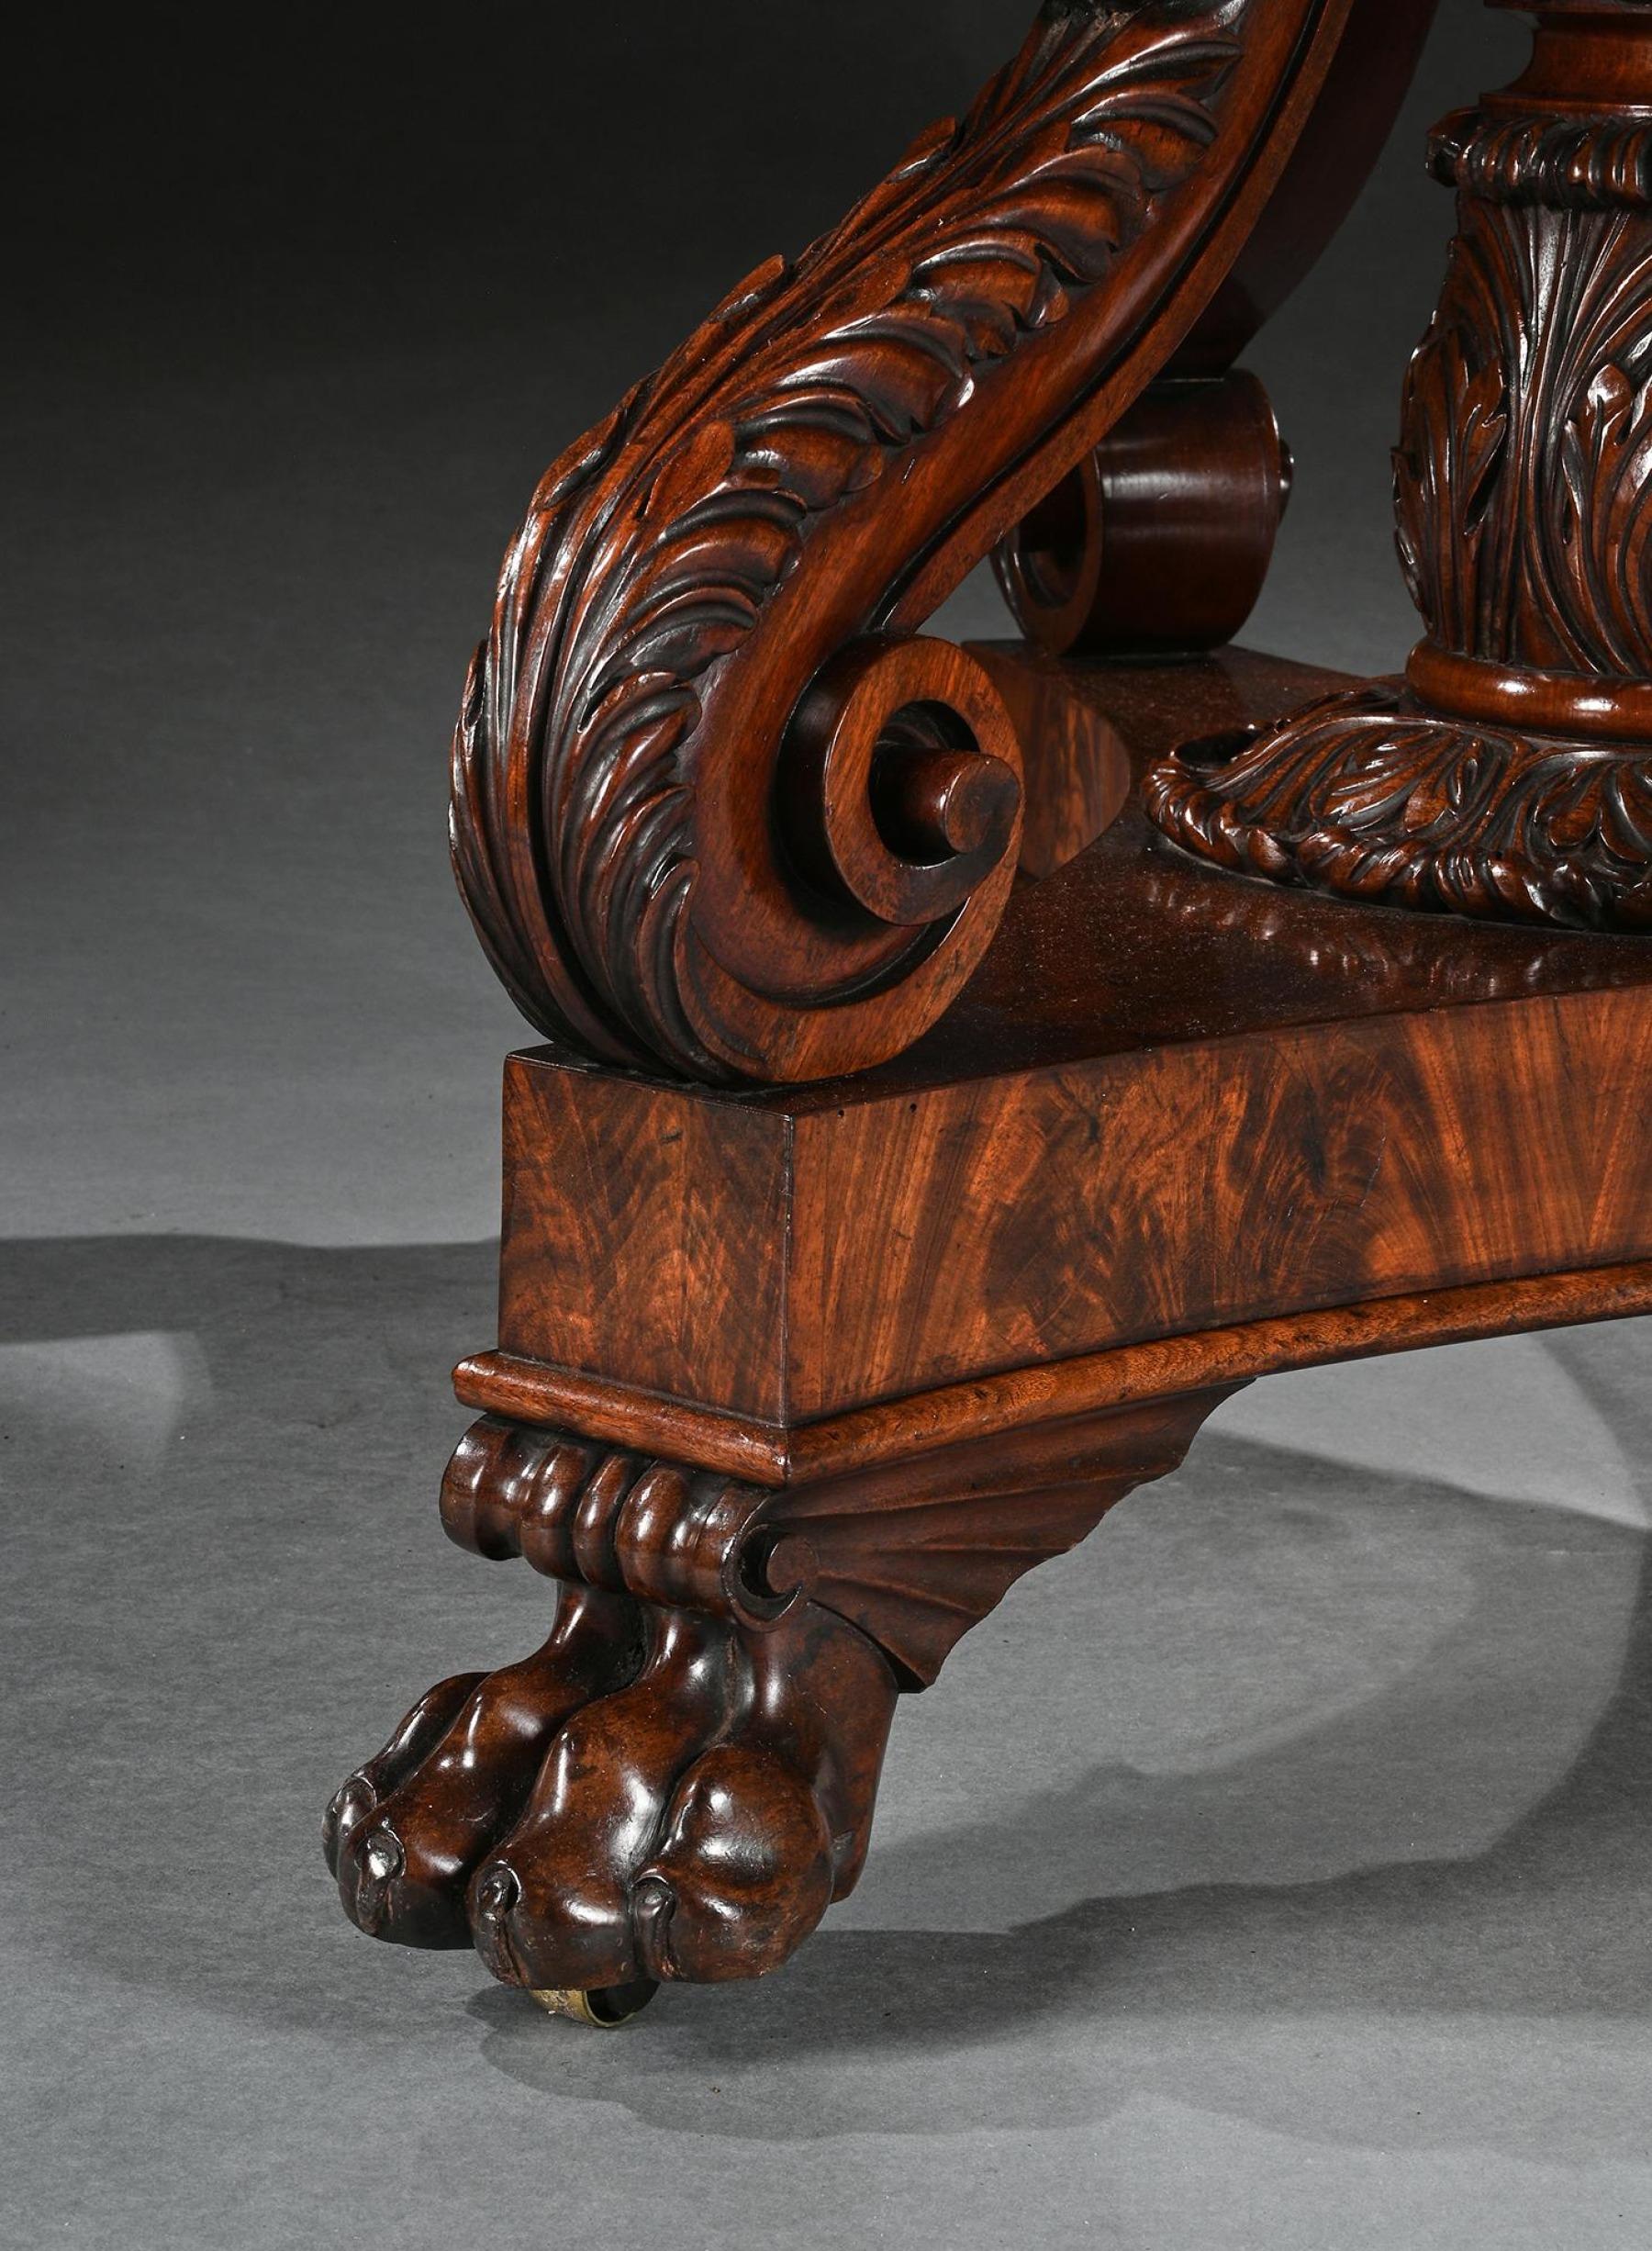 English Fine Regency Mahogany Centre Table, Possibly a Unique Commission Based on the De